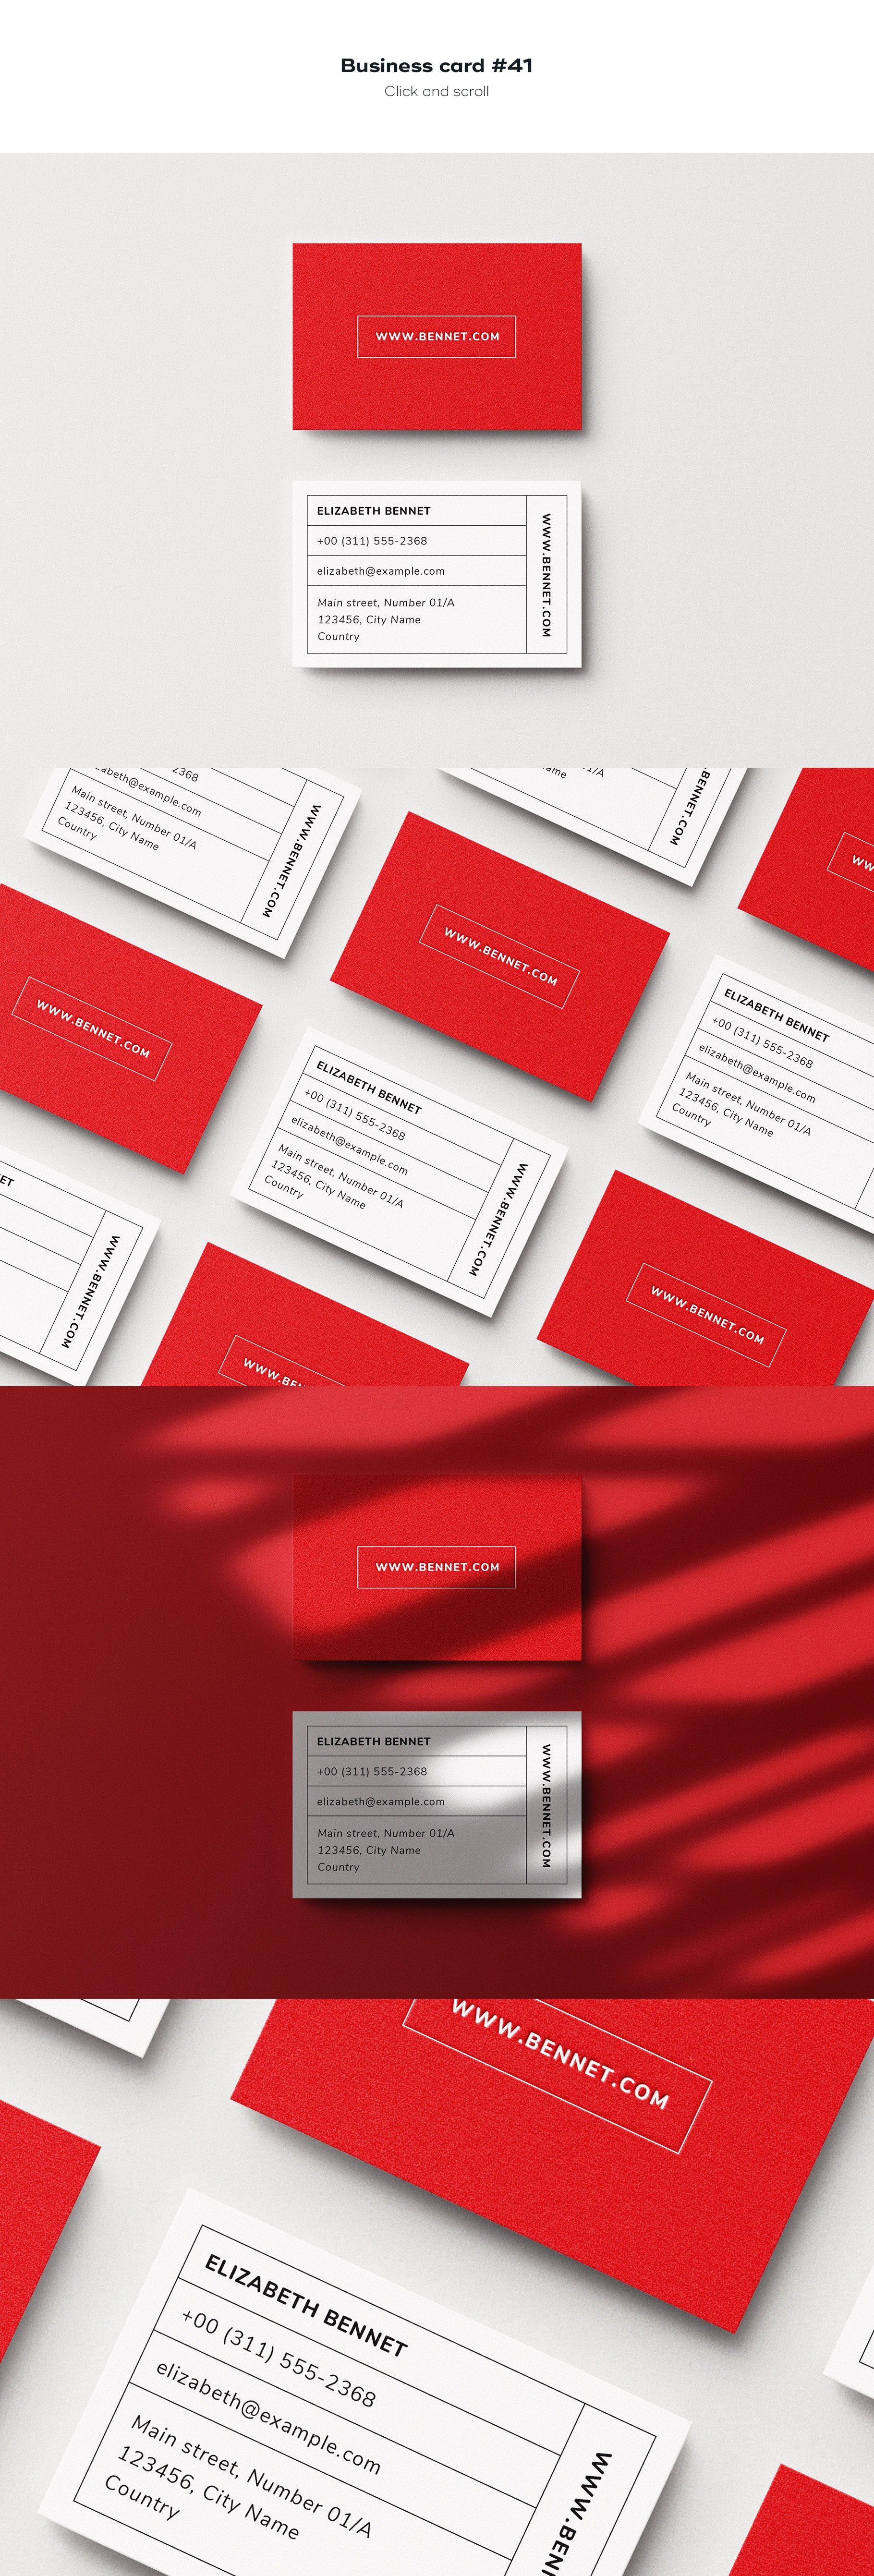 business card 41 471